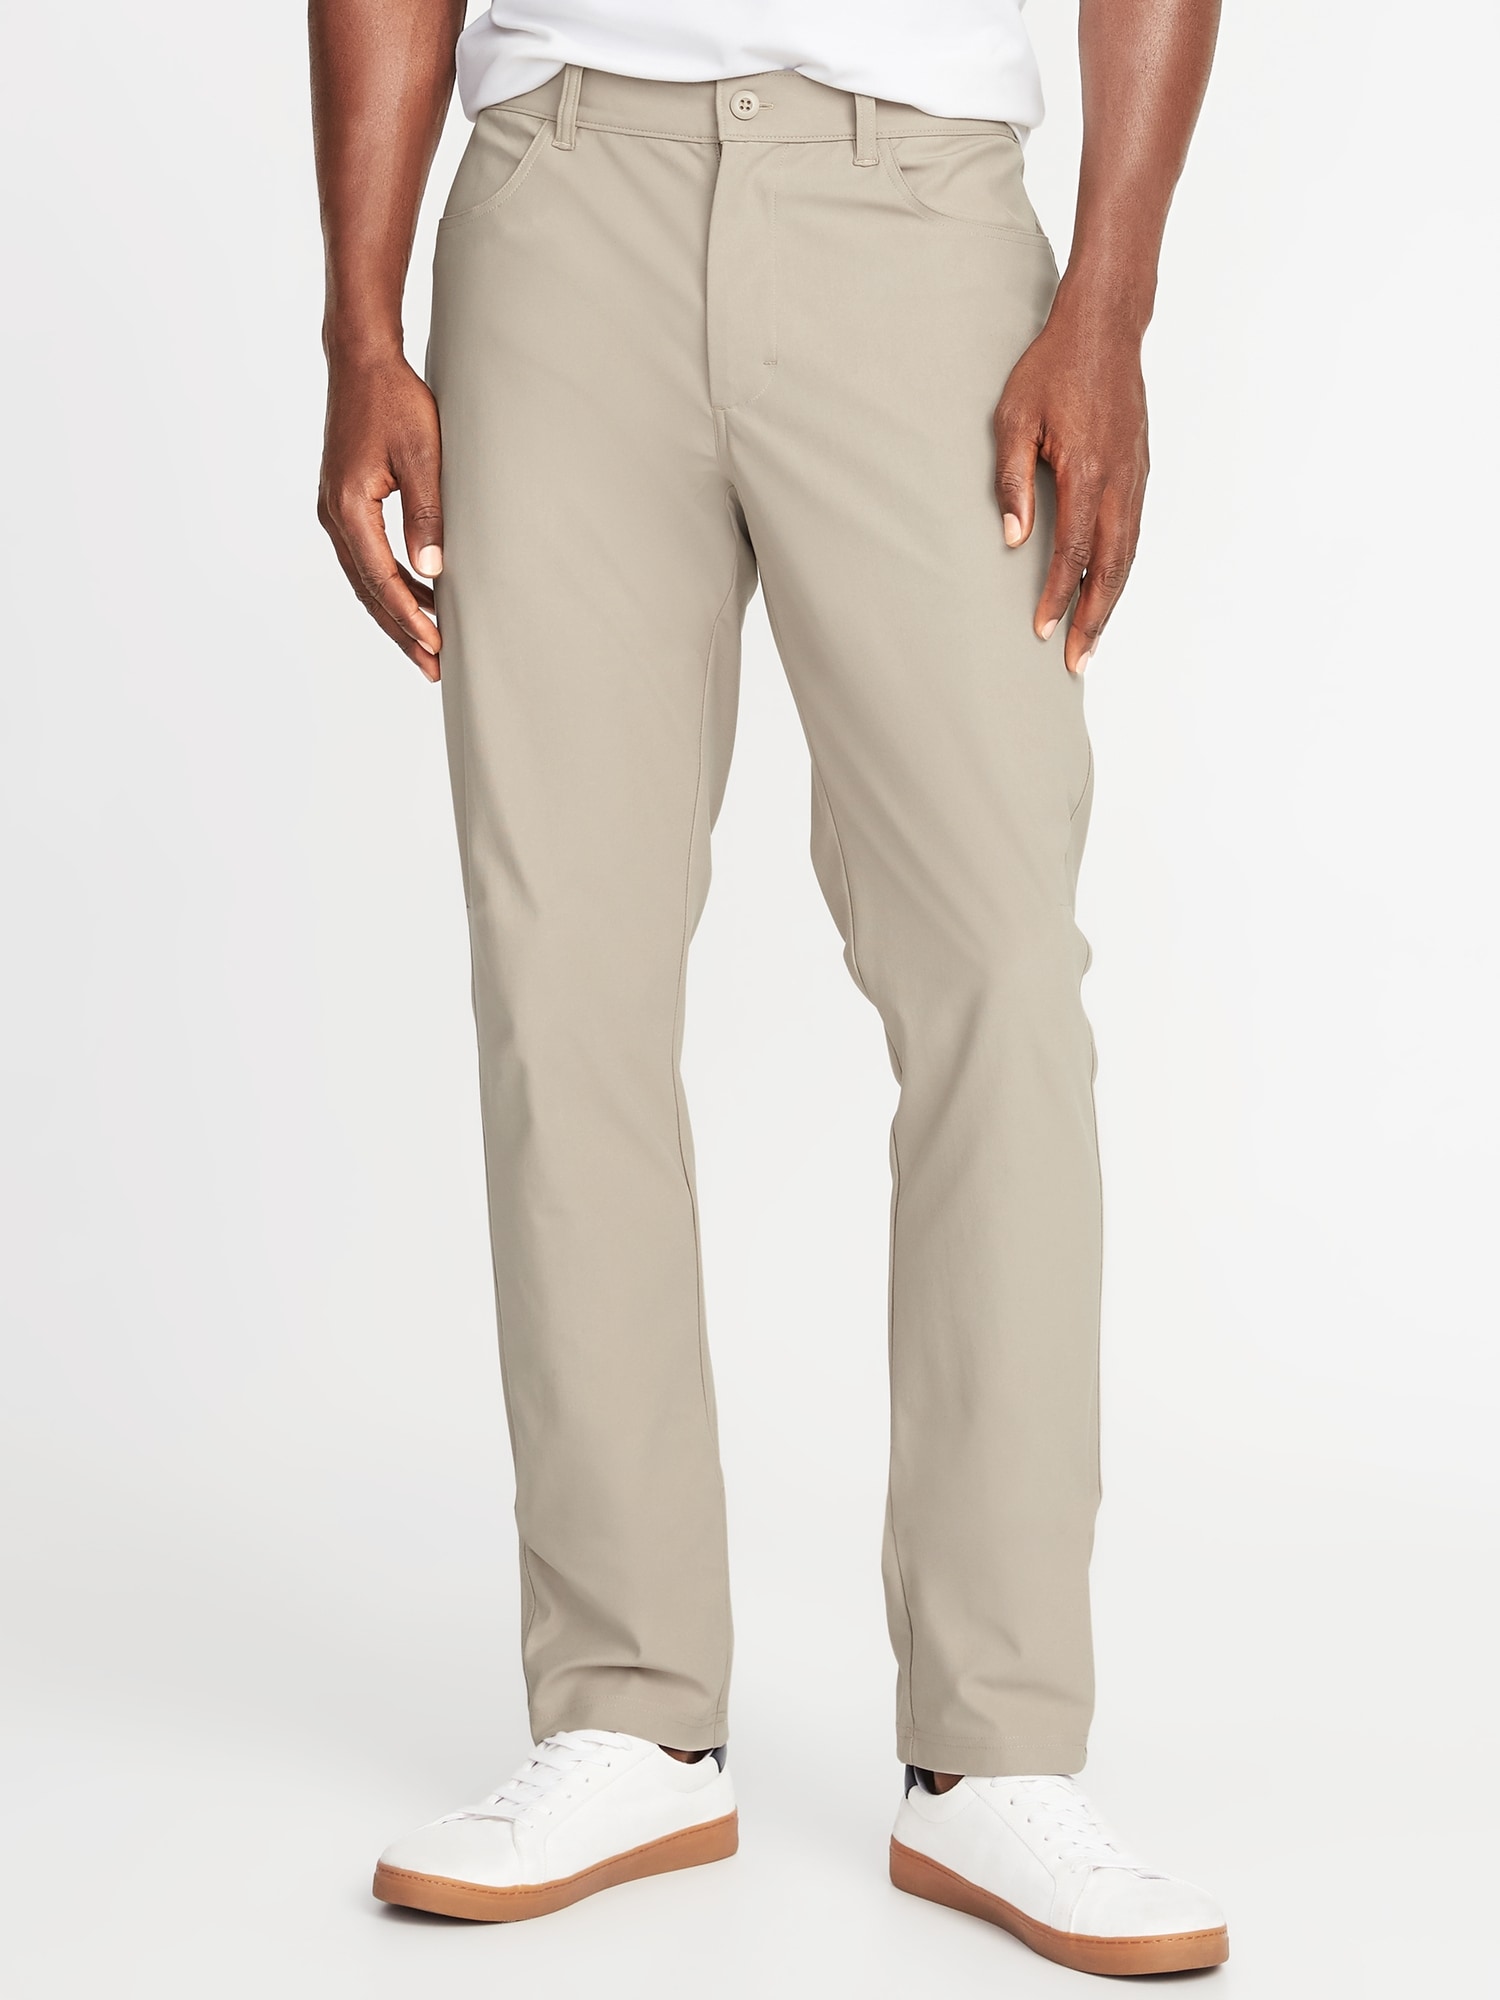 old navy insulated pants